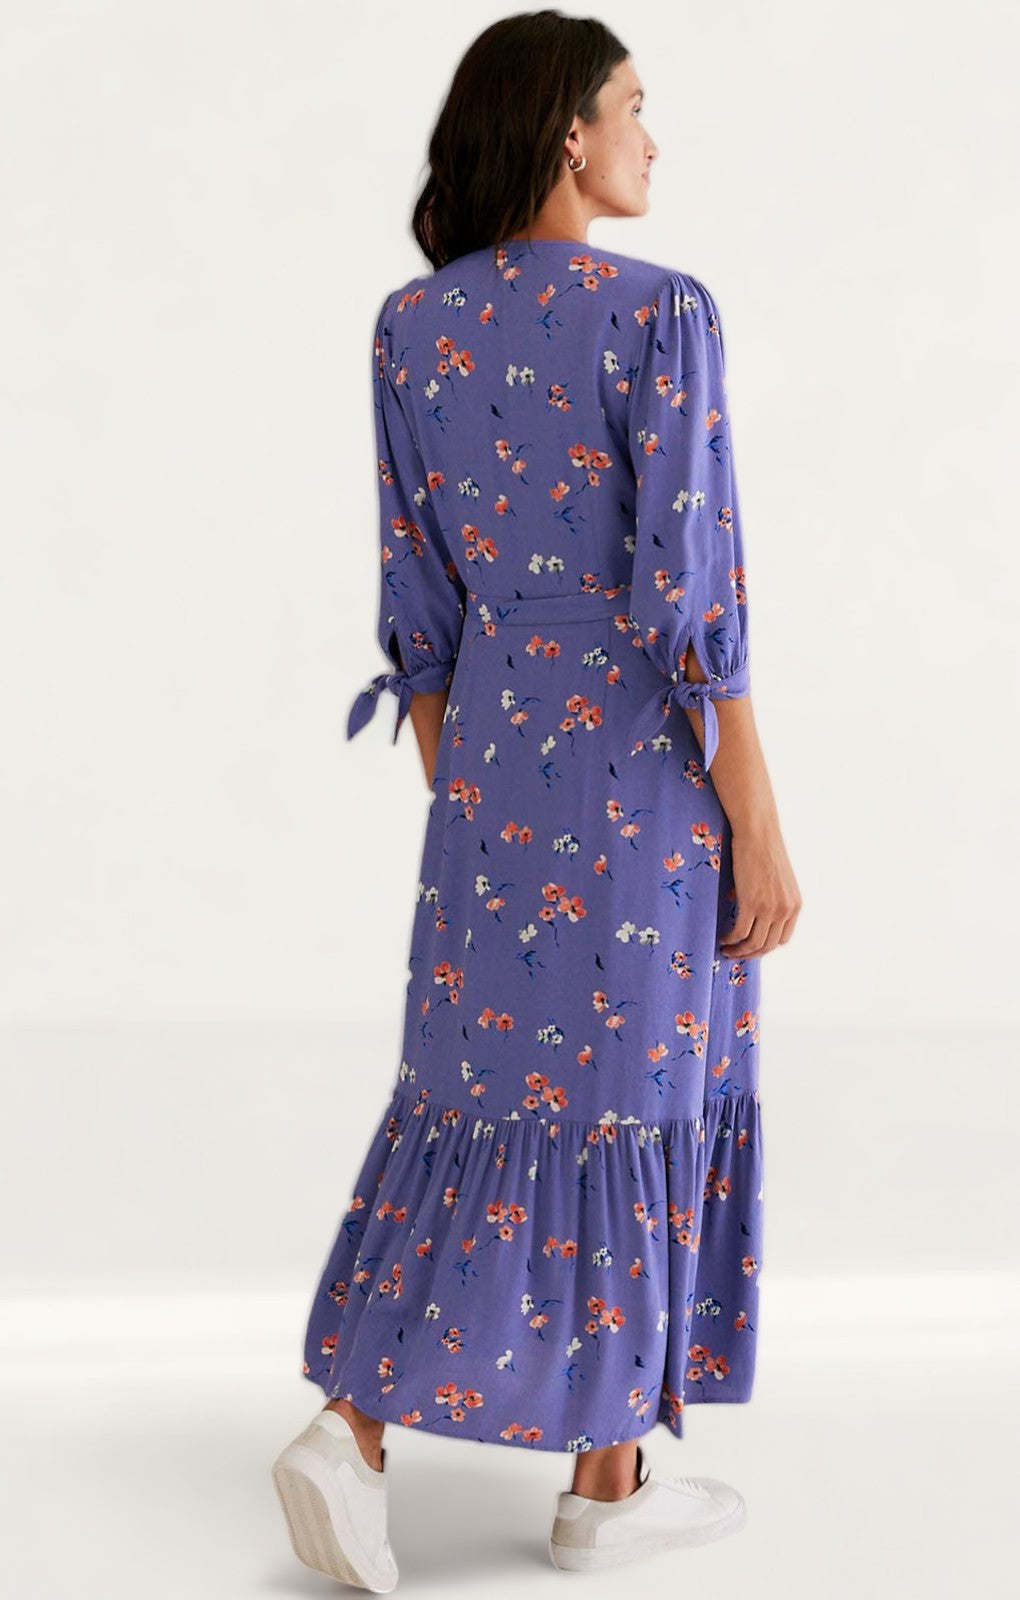 M&S X Ghost Floral Tie Sleeve Midi Wrap Dress product image